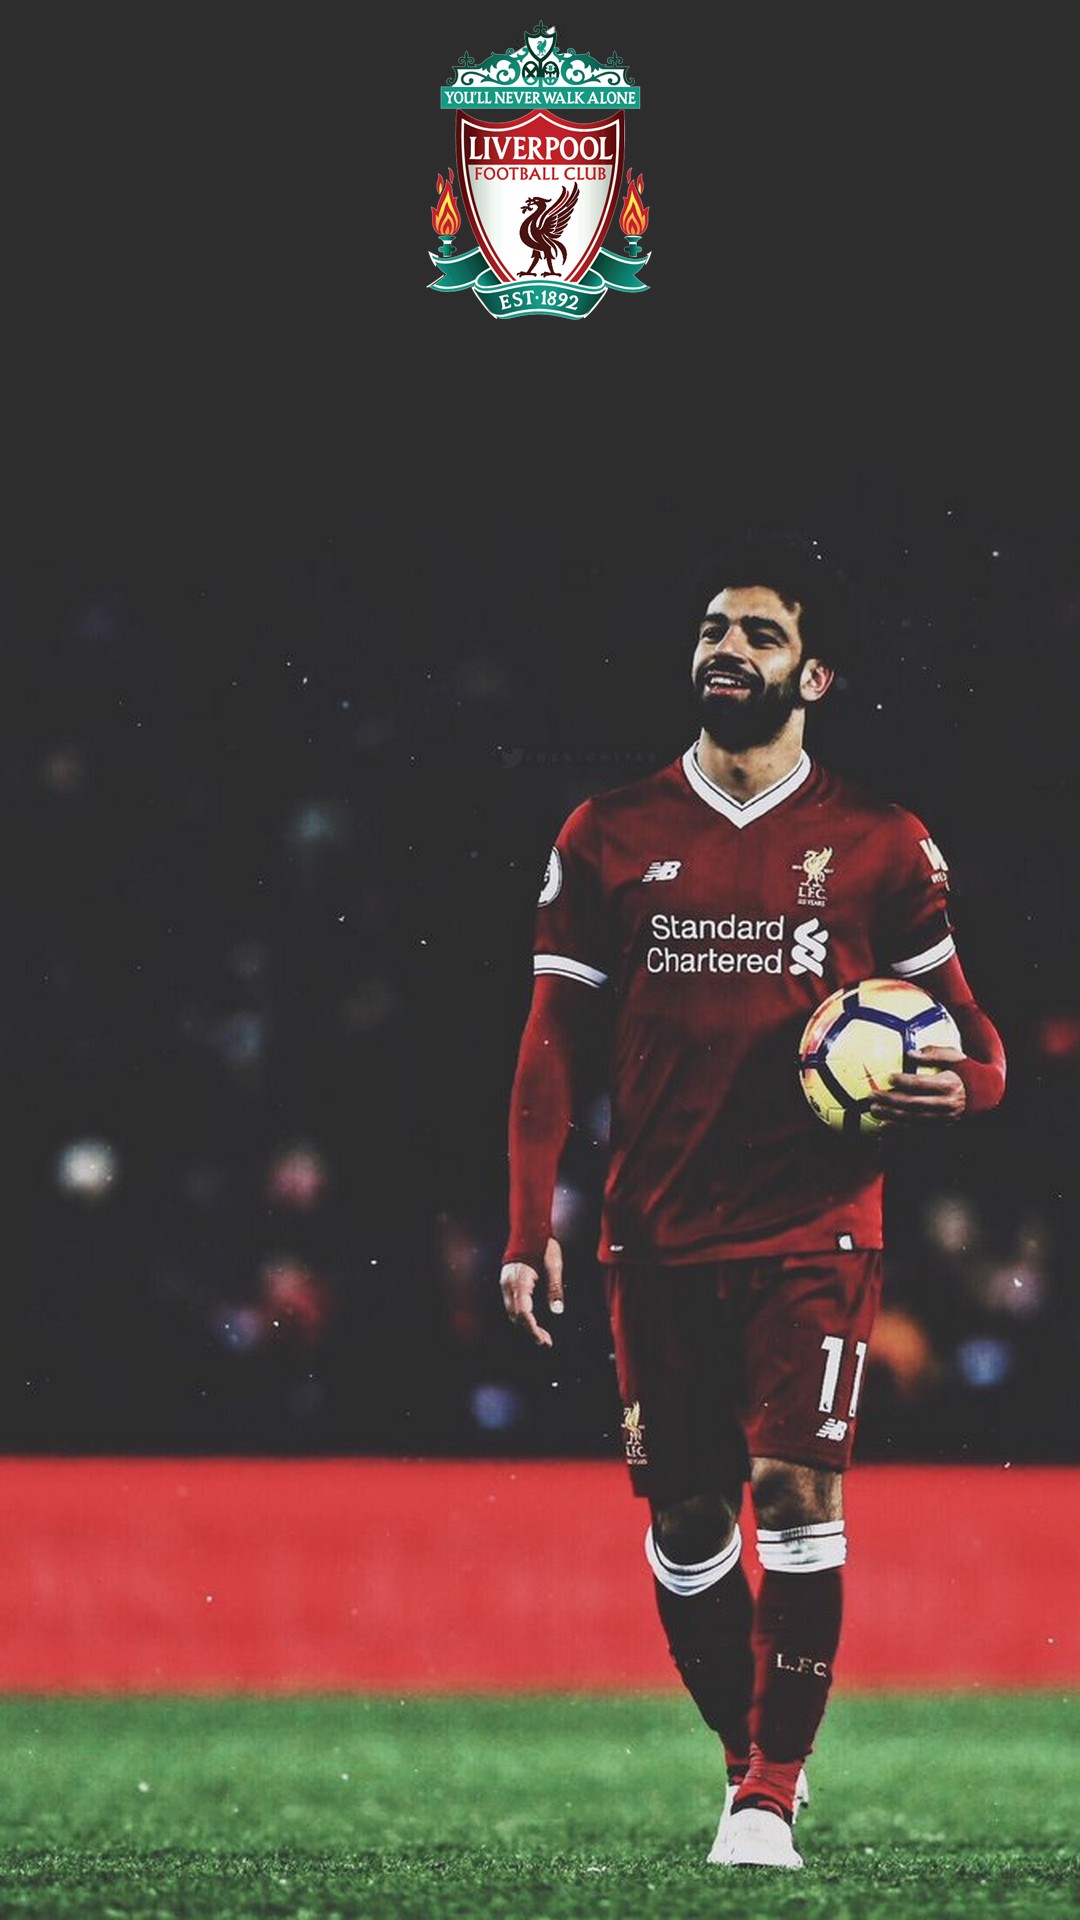 Android Wallpaper Liverpool Mohamed Salah with image resolution 1080x1920 pixel. You can make this wallpaper for your Android backgrounds, Tablet, Smartphones Screensavers and Mobile Phone Lock Screen